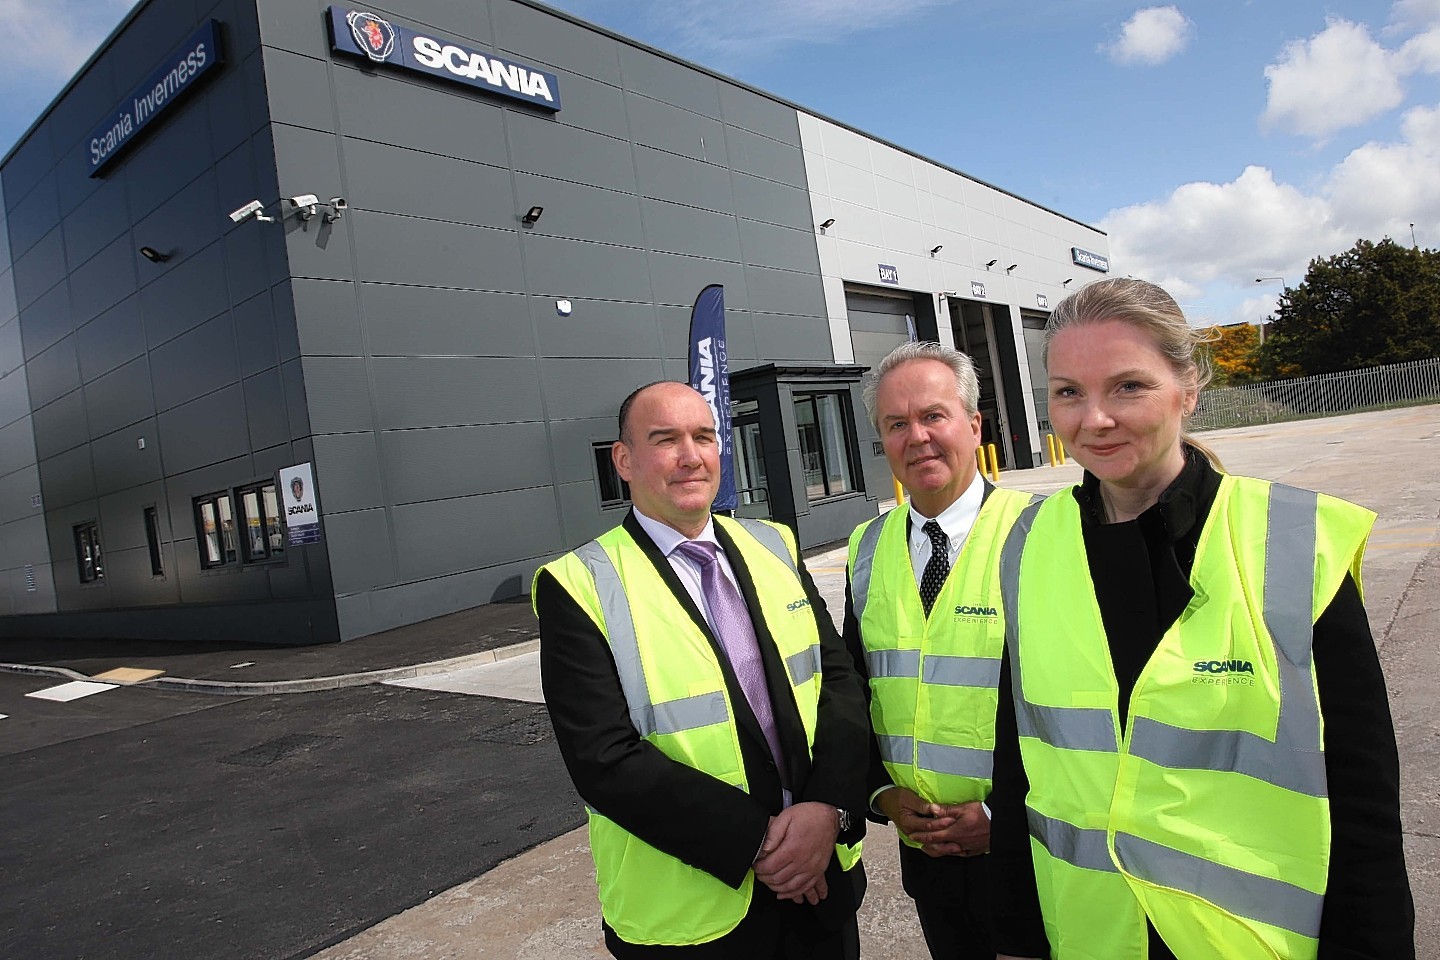 L-R Scania Inverness general manager Iain Duncan, Scania GB managing director Claes Jacobsson and Swedish Ambassador Nicola Clase